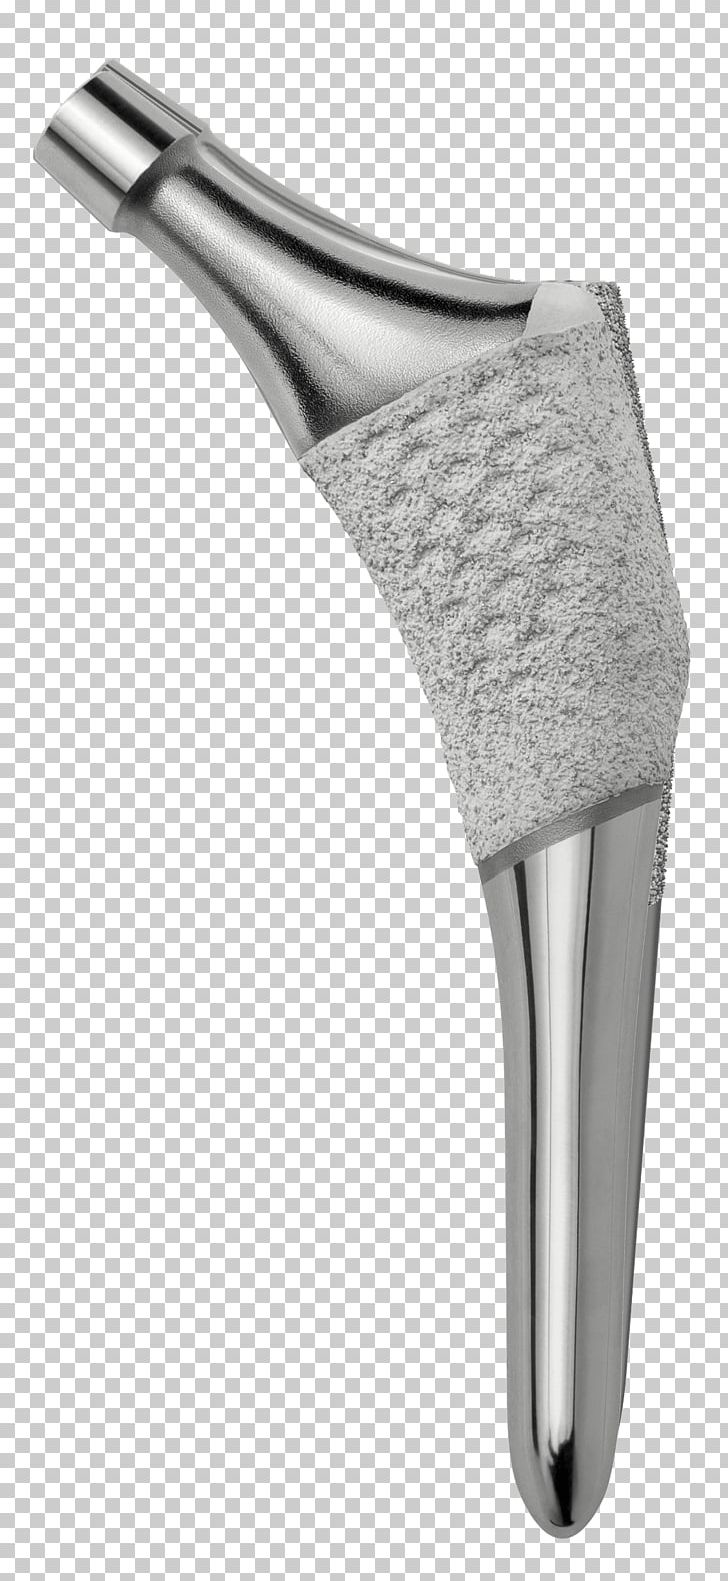 Hip Replacement Implant Femur Itsourtree.com PNG, Clipart, Angle, Brush, Femur, Hip, Hip Replacement Free PNG Download